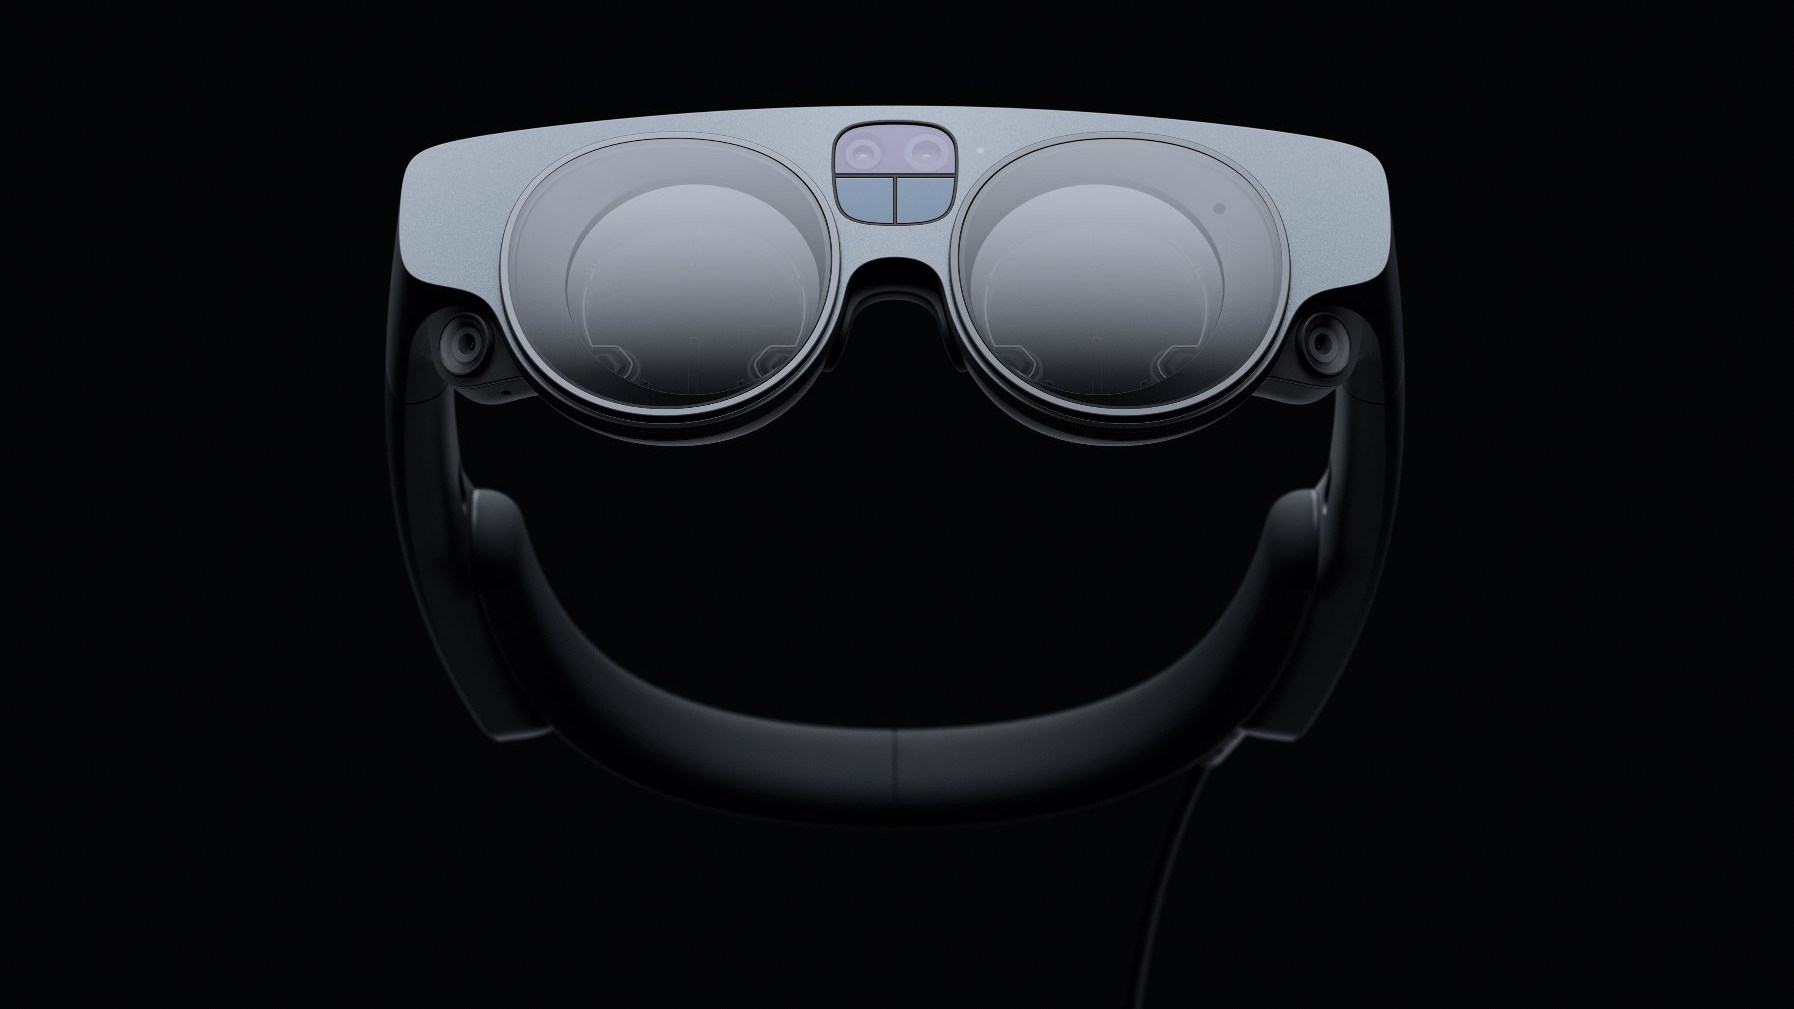 Tons of New Magic Leap 2 Details Shed Light on Dynamic Dimming & More